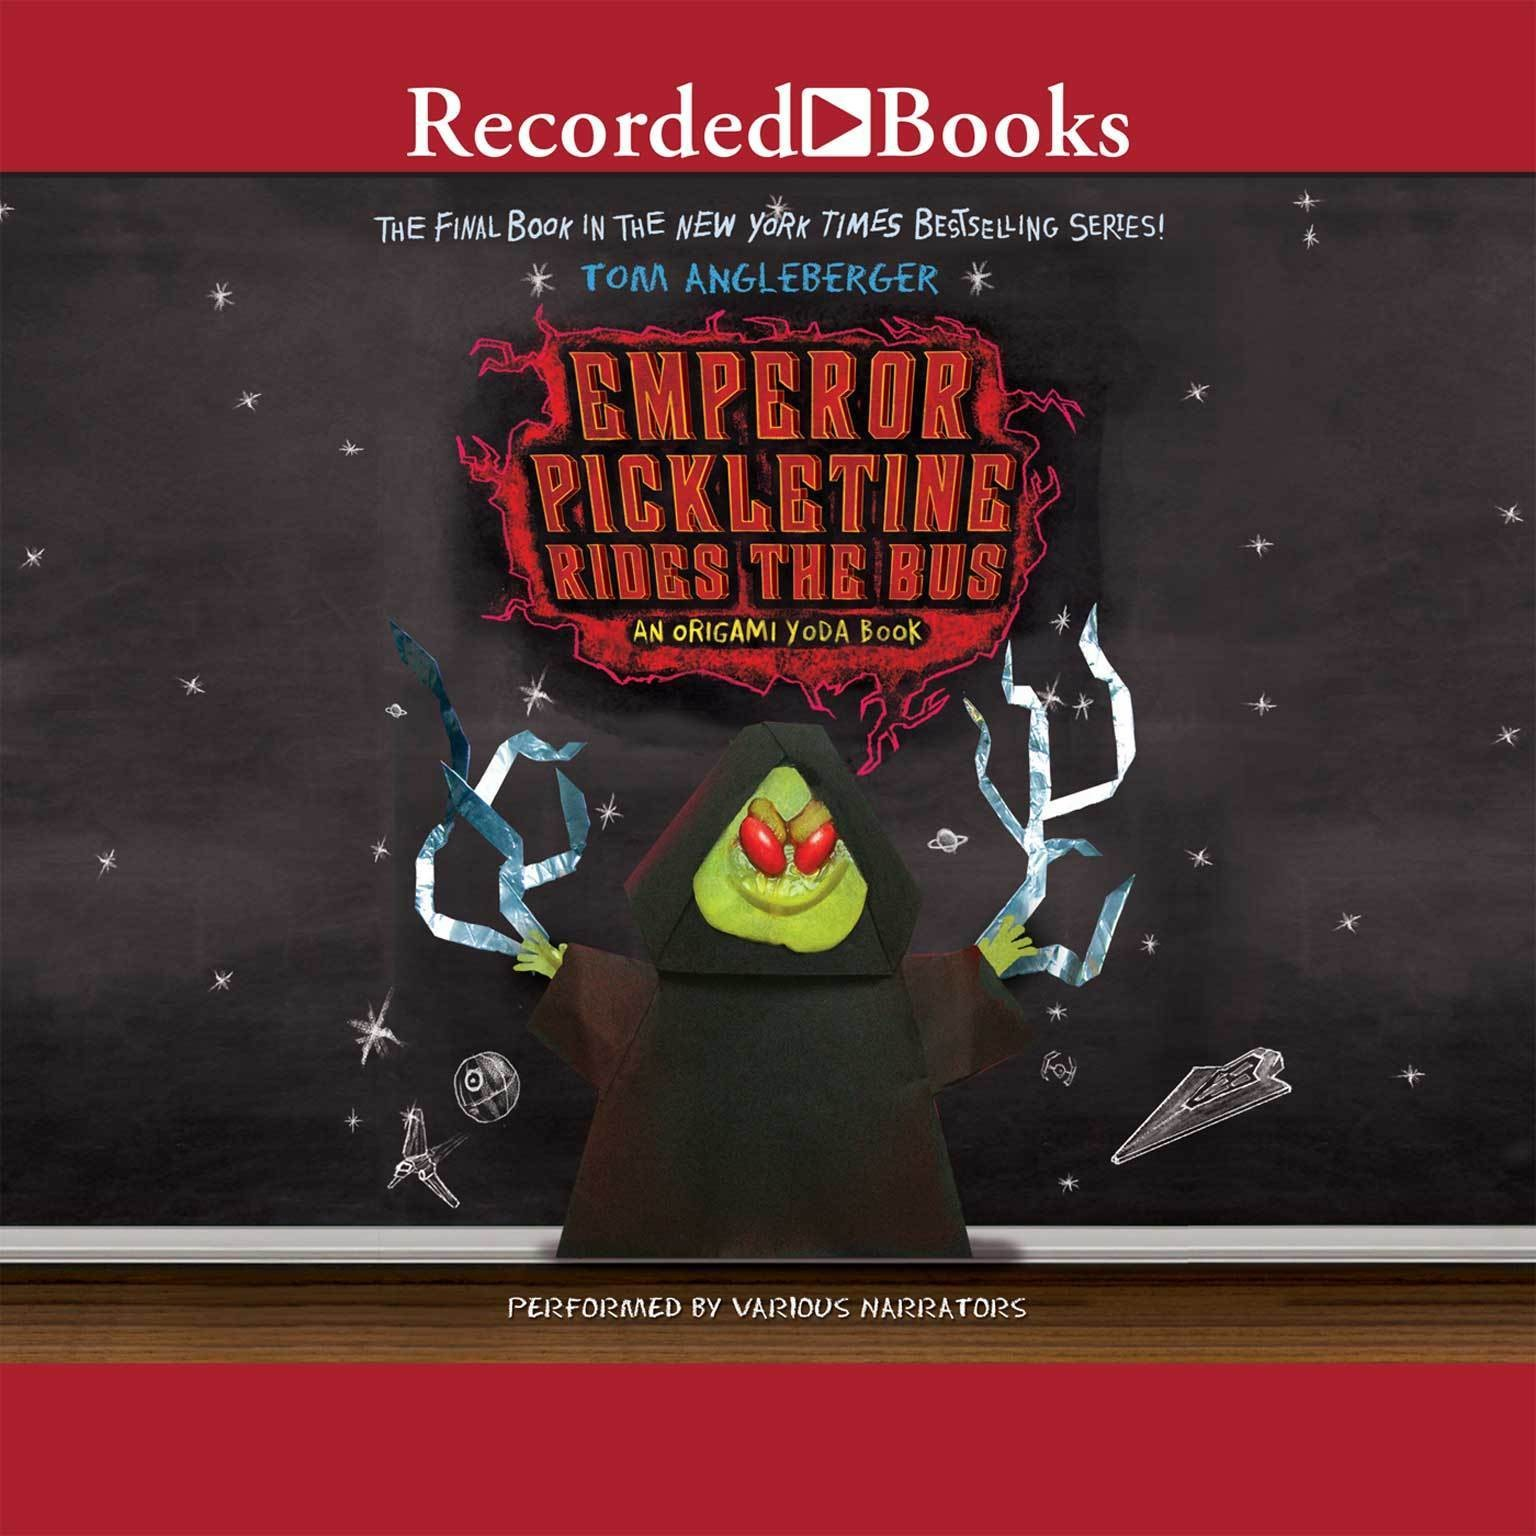 How To Make Origami Emperor Palpatine Emperor Pickletine Rides The Bus An Origami Yoda Book Audiobook